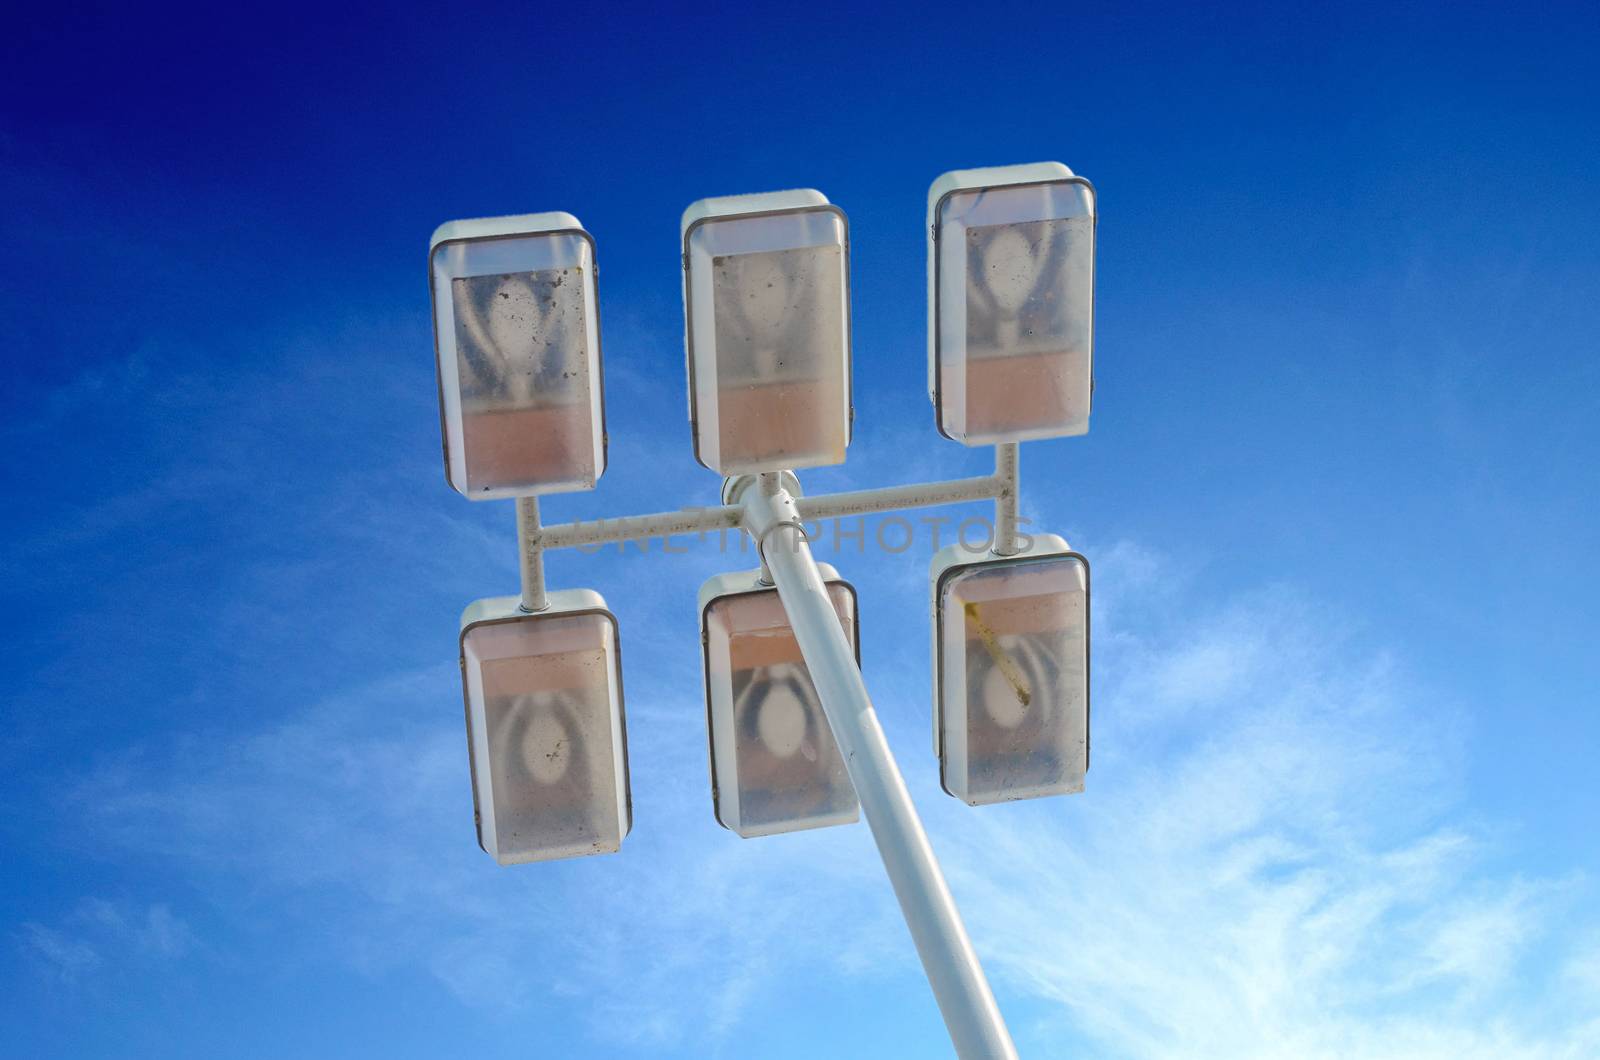 Large street lamp with six lamps in front of blue sky.